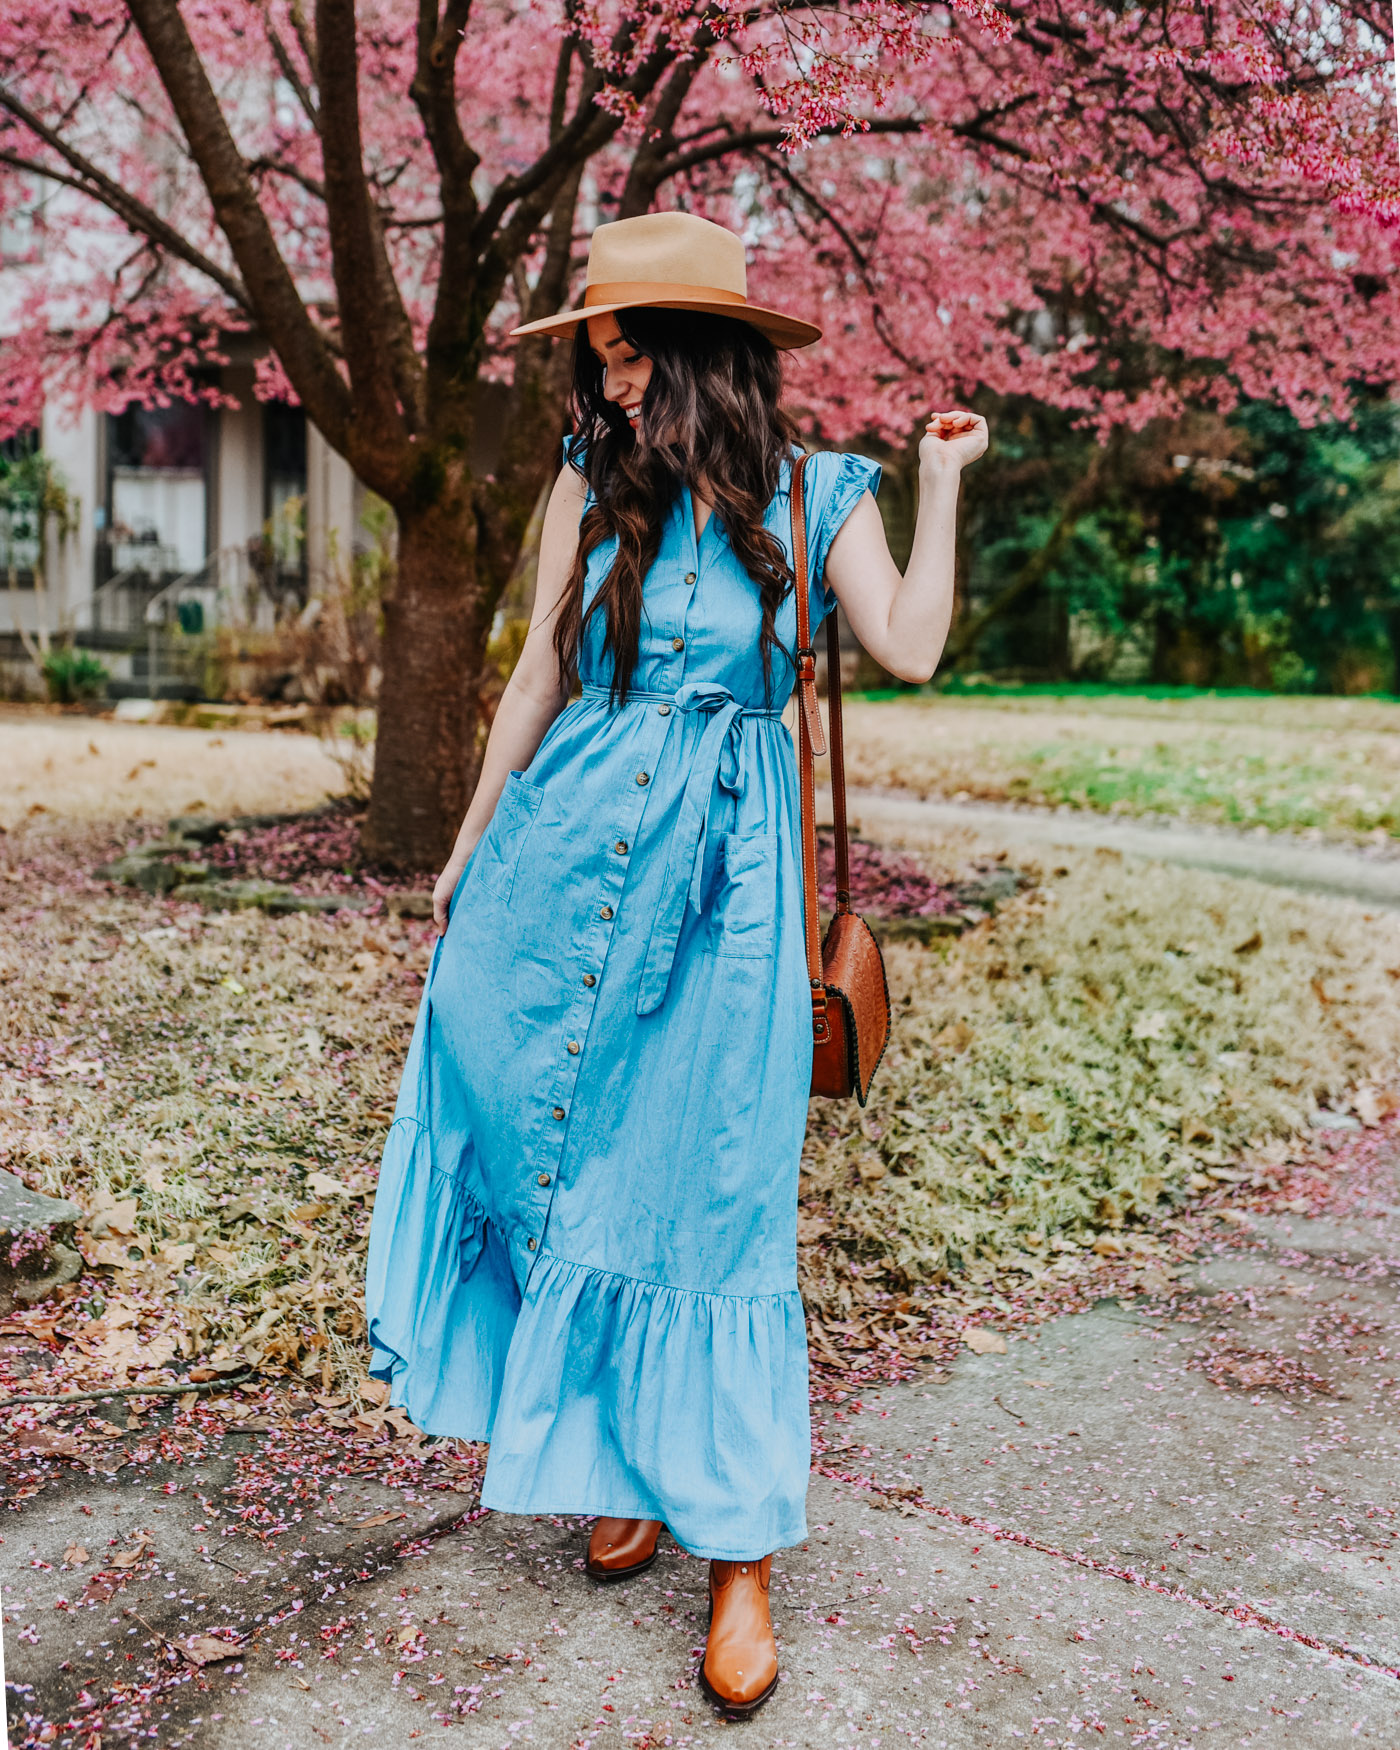 Maxi Dress and Cowboy Boots look styled by top Memphis fashion blog, Lone Star Looking Glass.